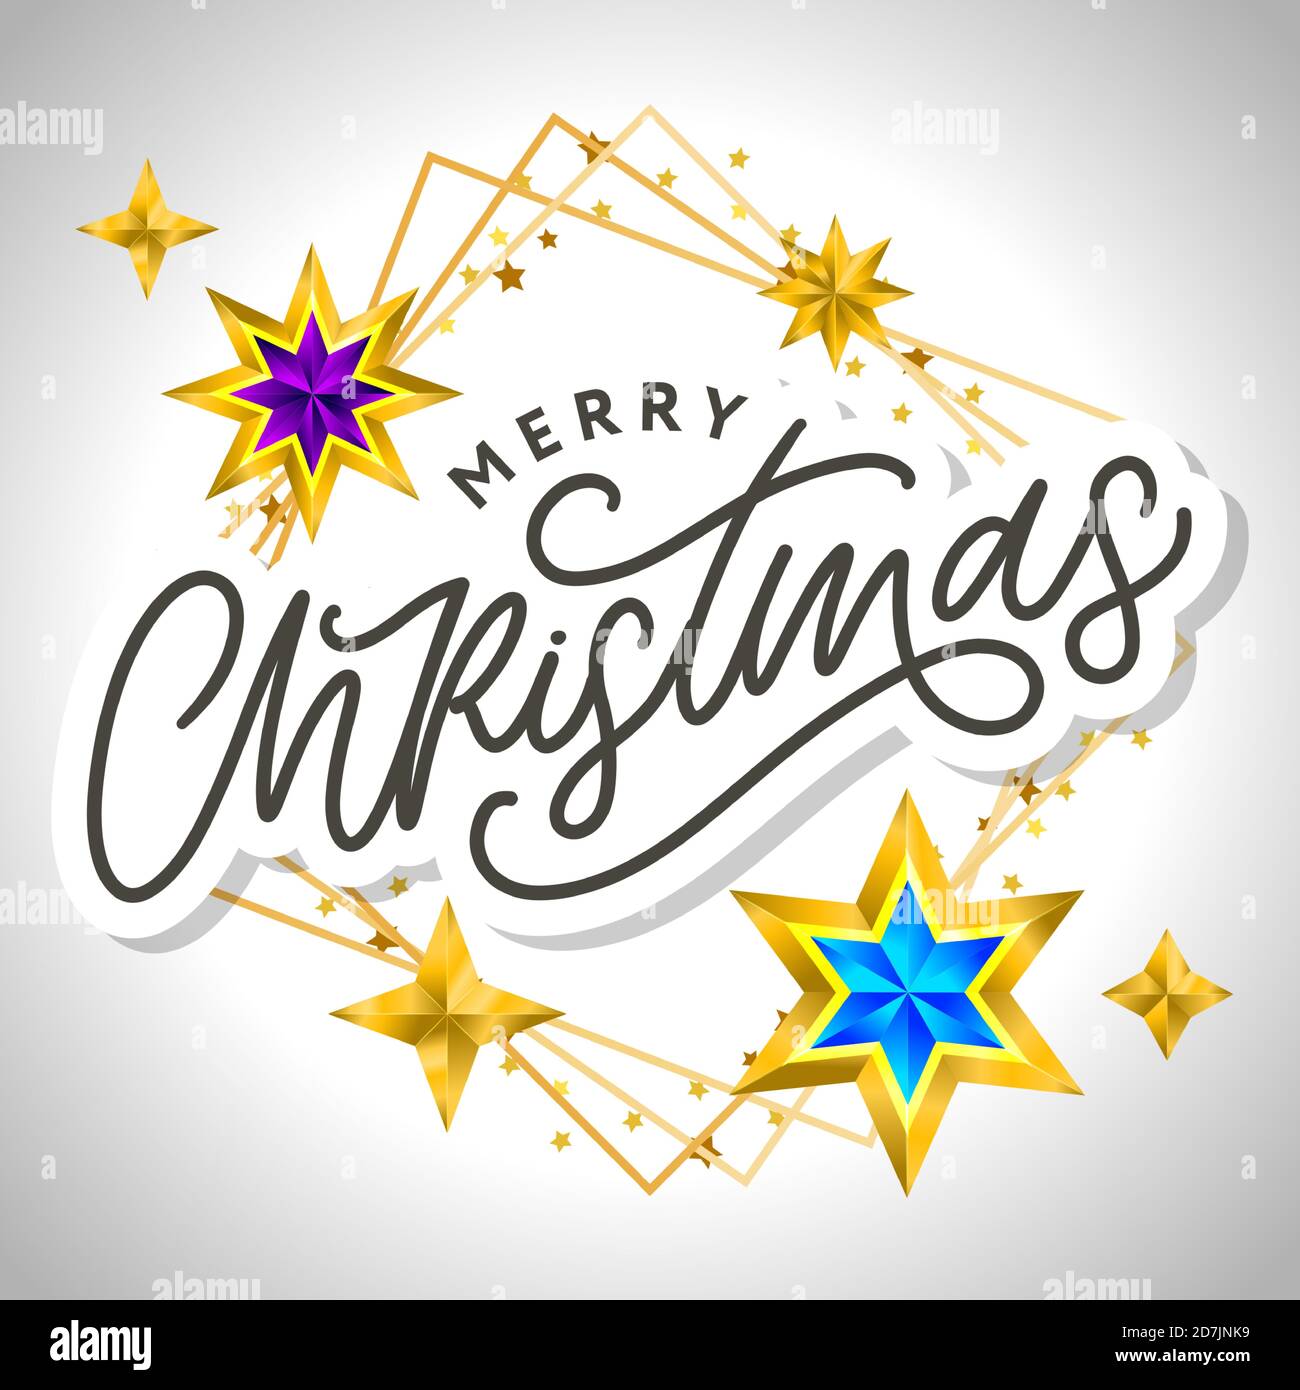 Merry Christmas card with hand drawn lettering and stars on dark background. Cute Holiday golden frame background Stock Vector